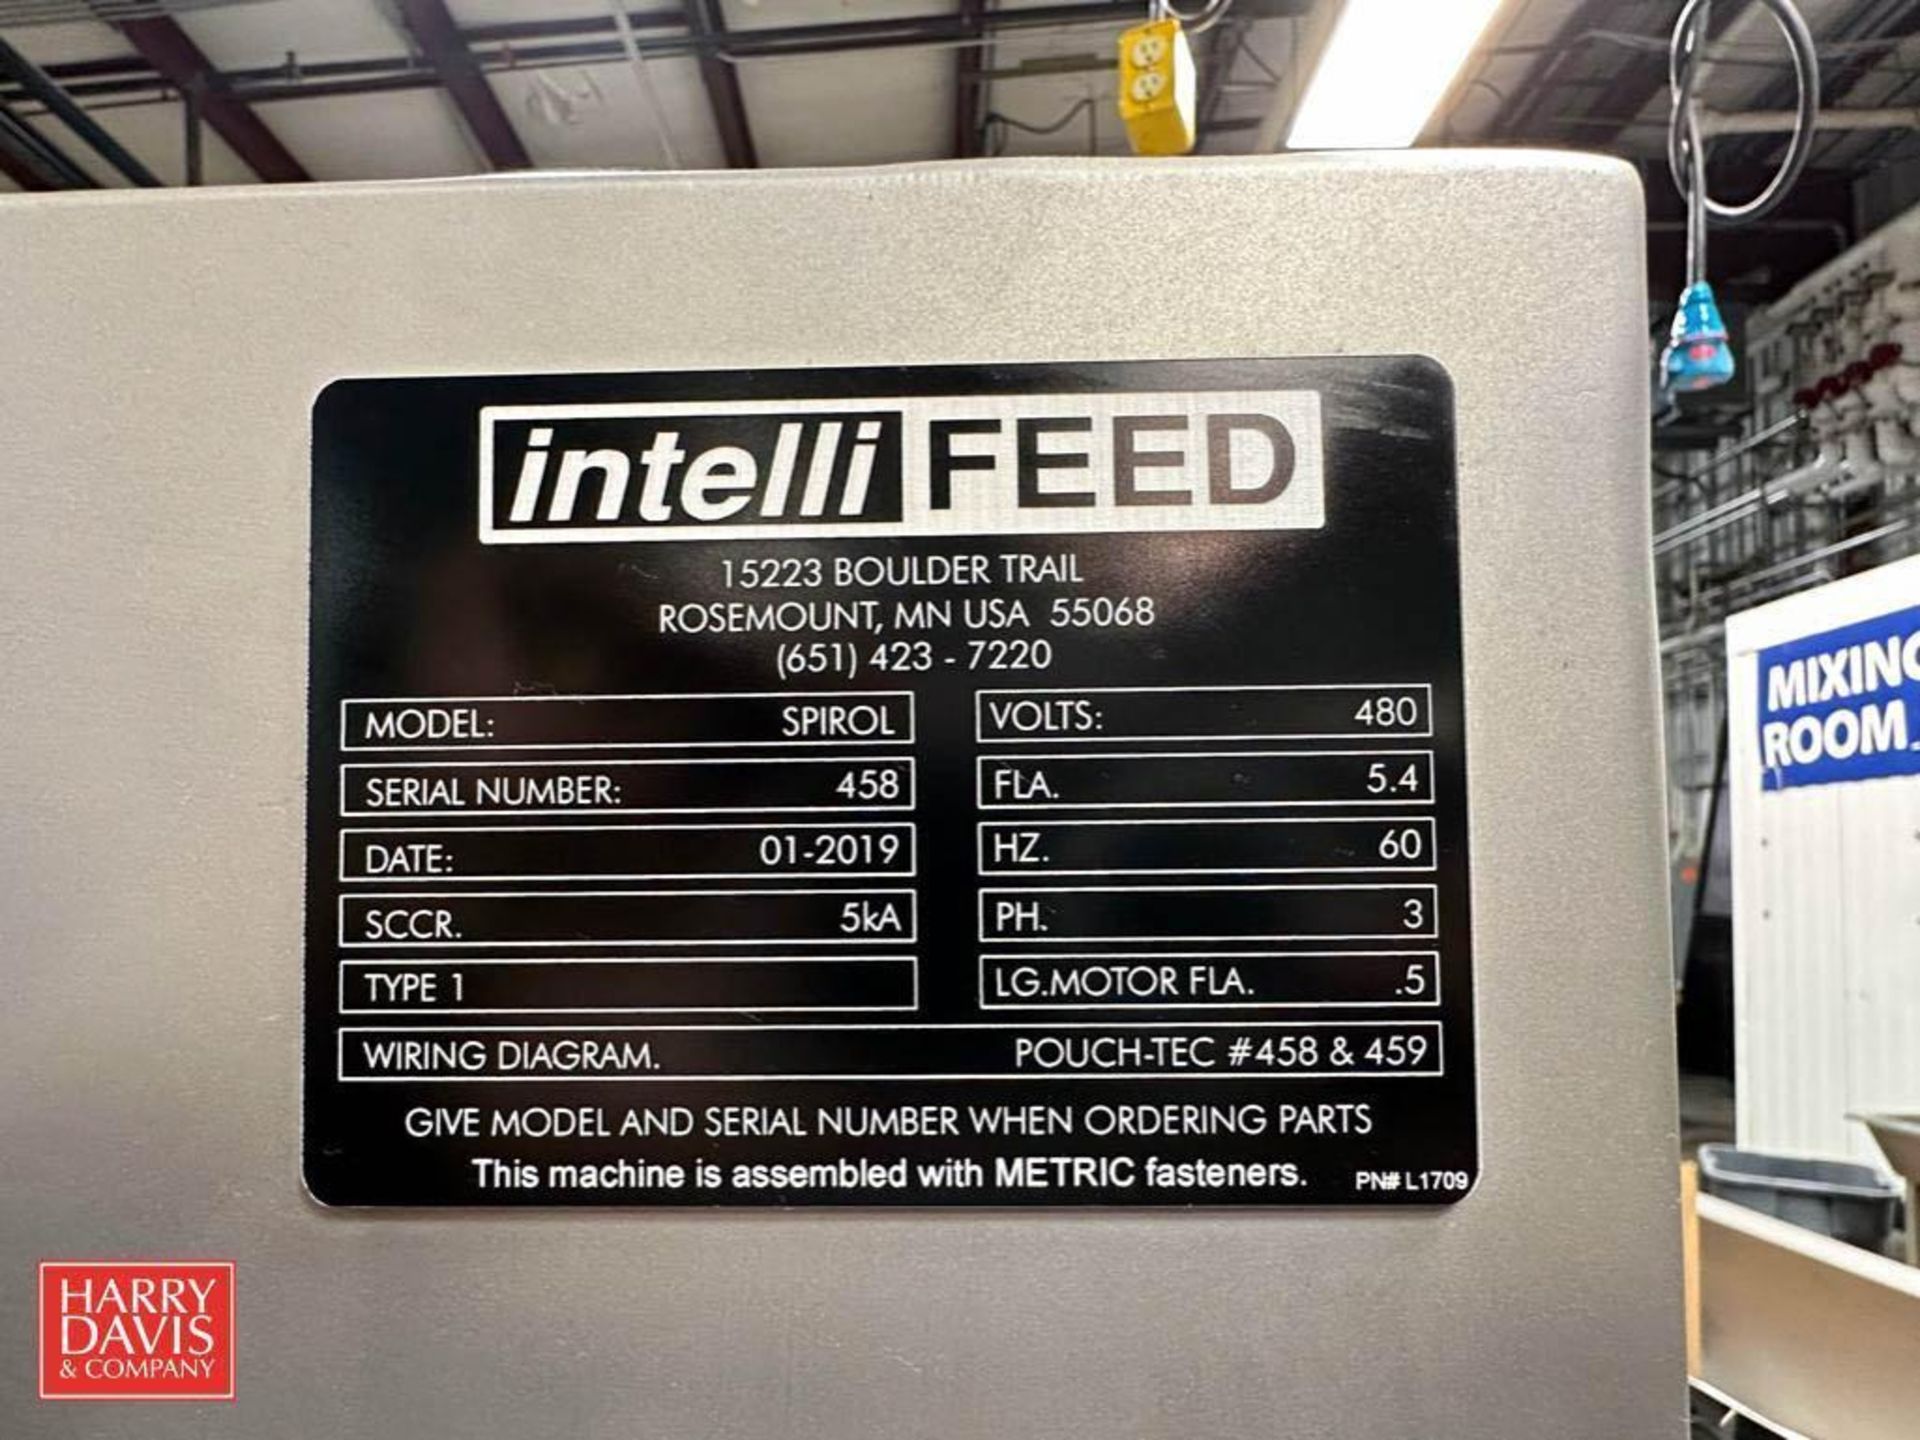 2019 IntelliFeed High Speed Pouch Feeder, Model: SPIROL, S/N: 458 with AC Tech 1 HP Variable - Image 4 of 5